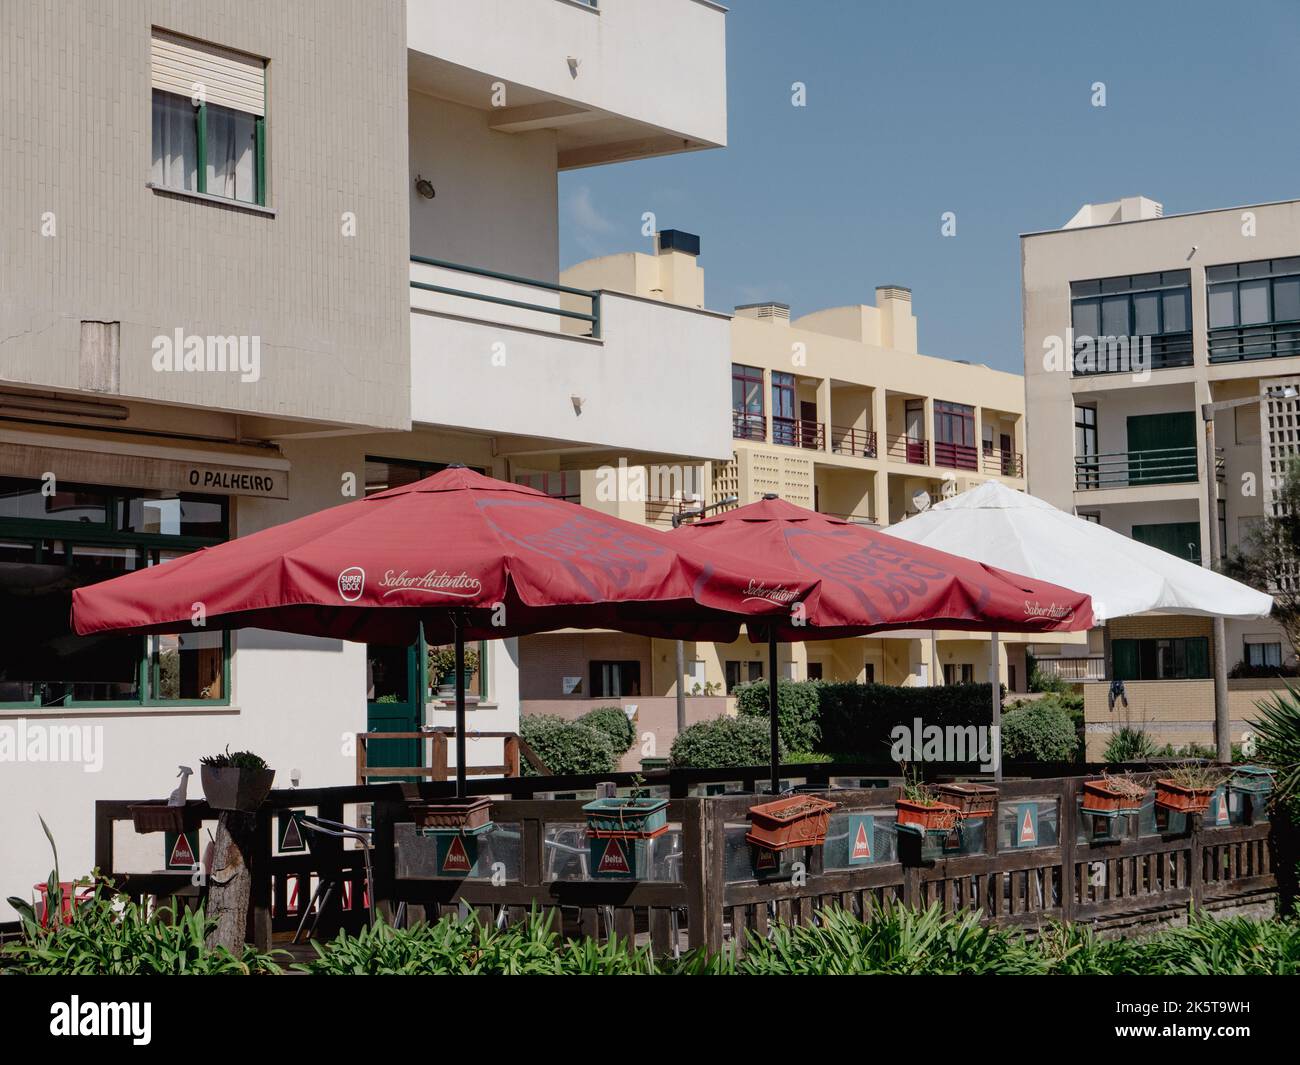 Colourful residential buildings at the small coastal town of Tocha in Cantanhede, Portugal. Photo: SMP News Stock Photo